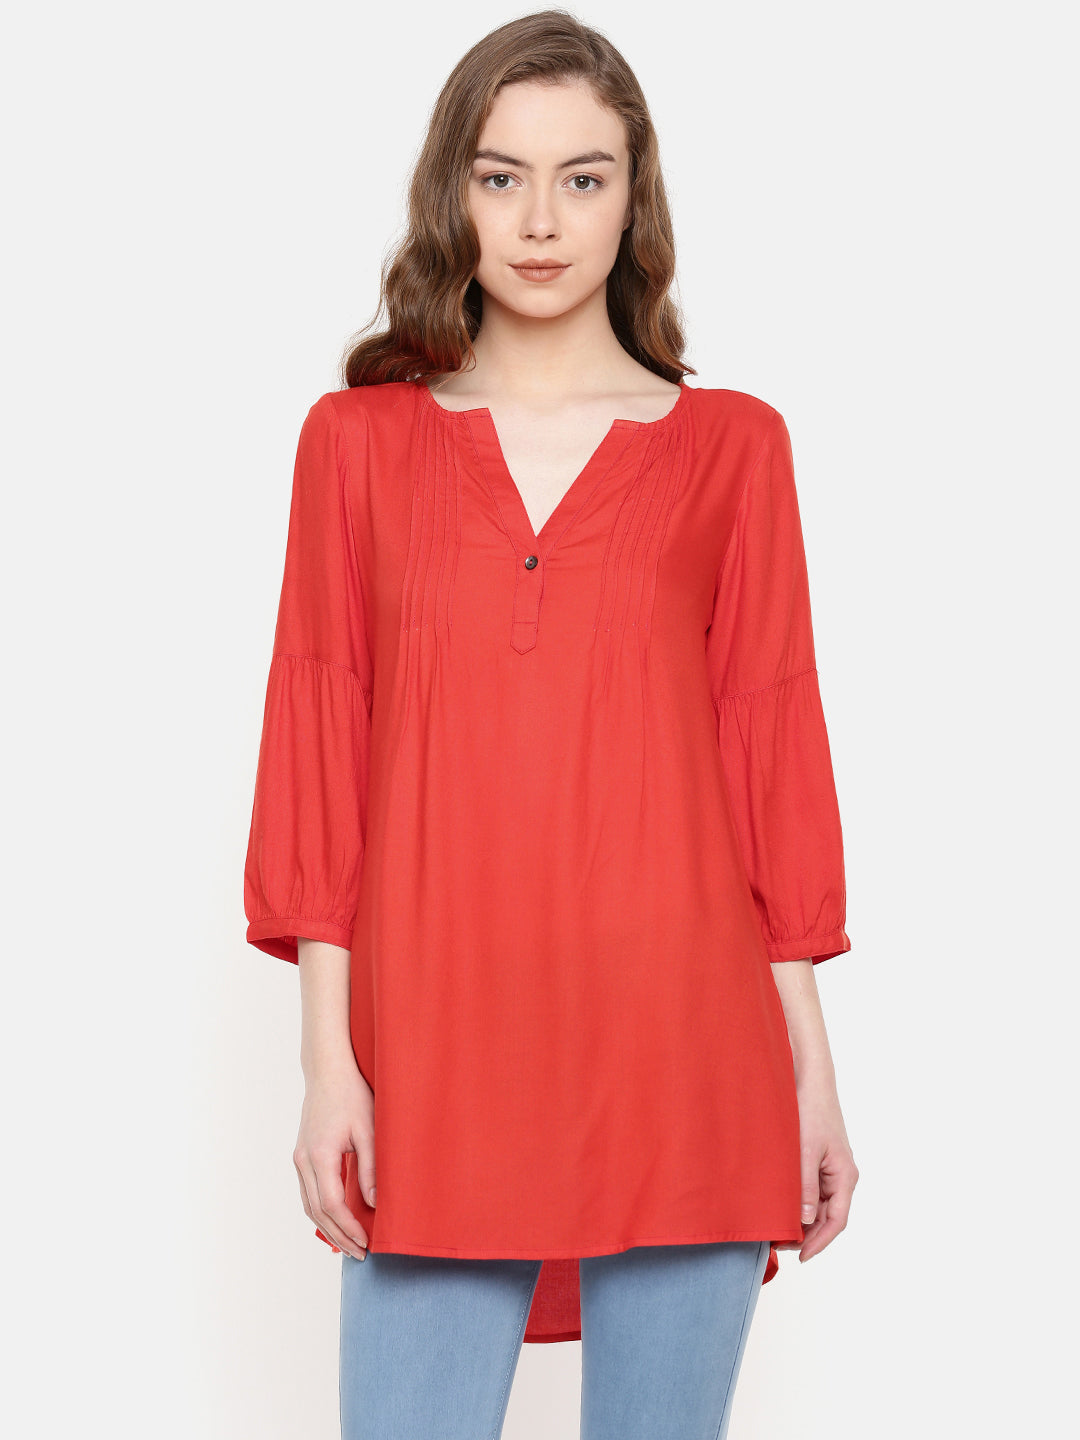 V neck red tunic top